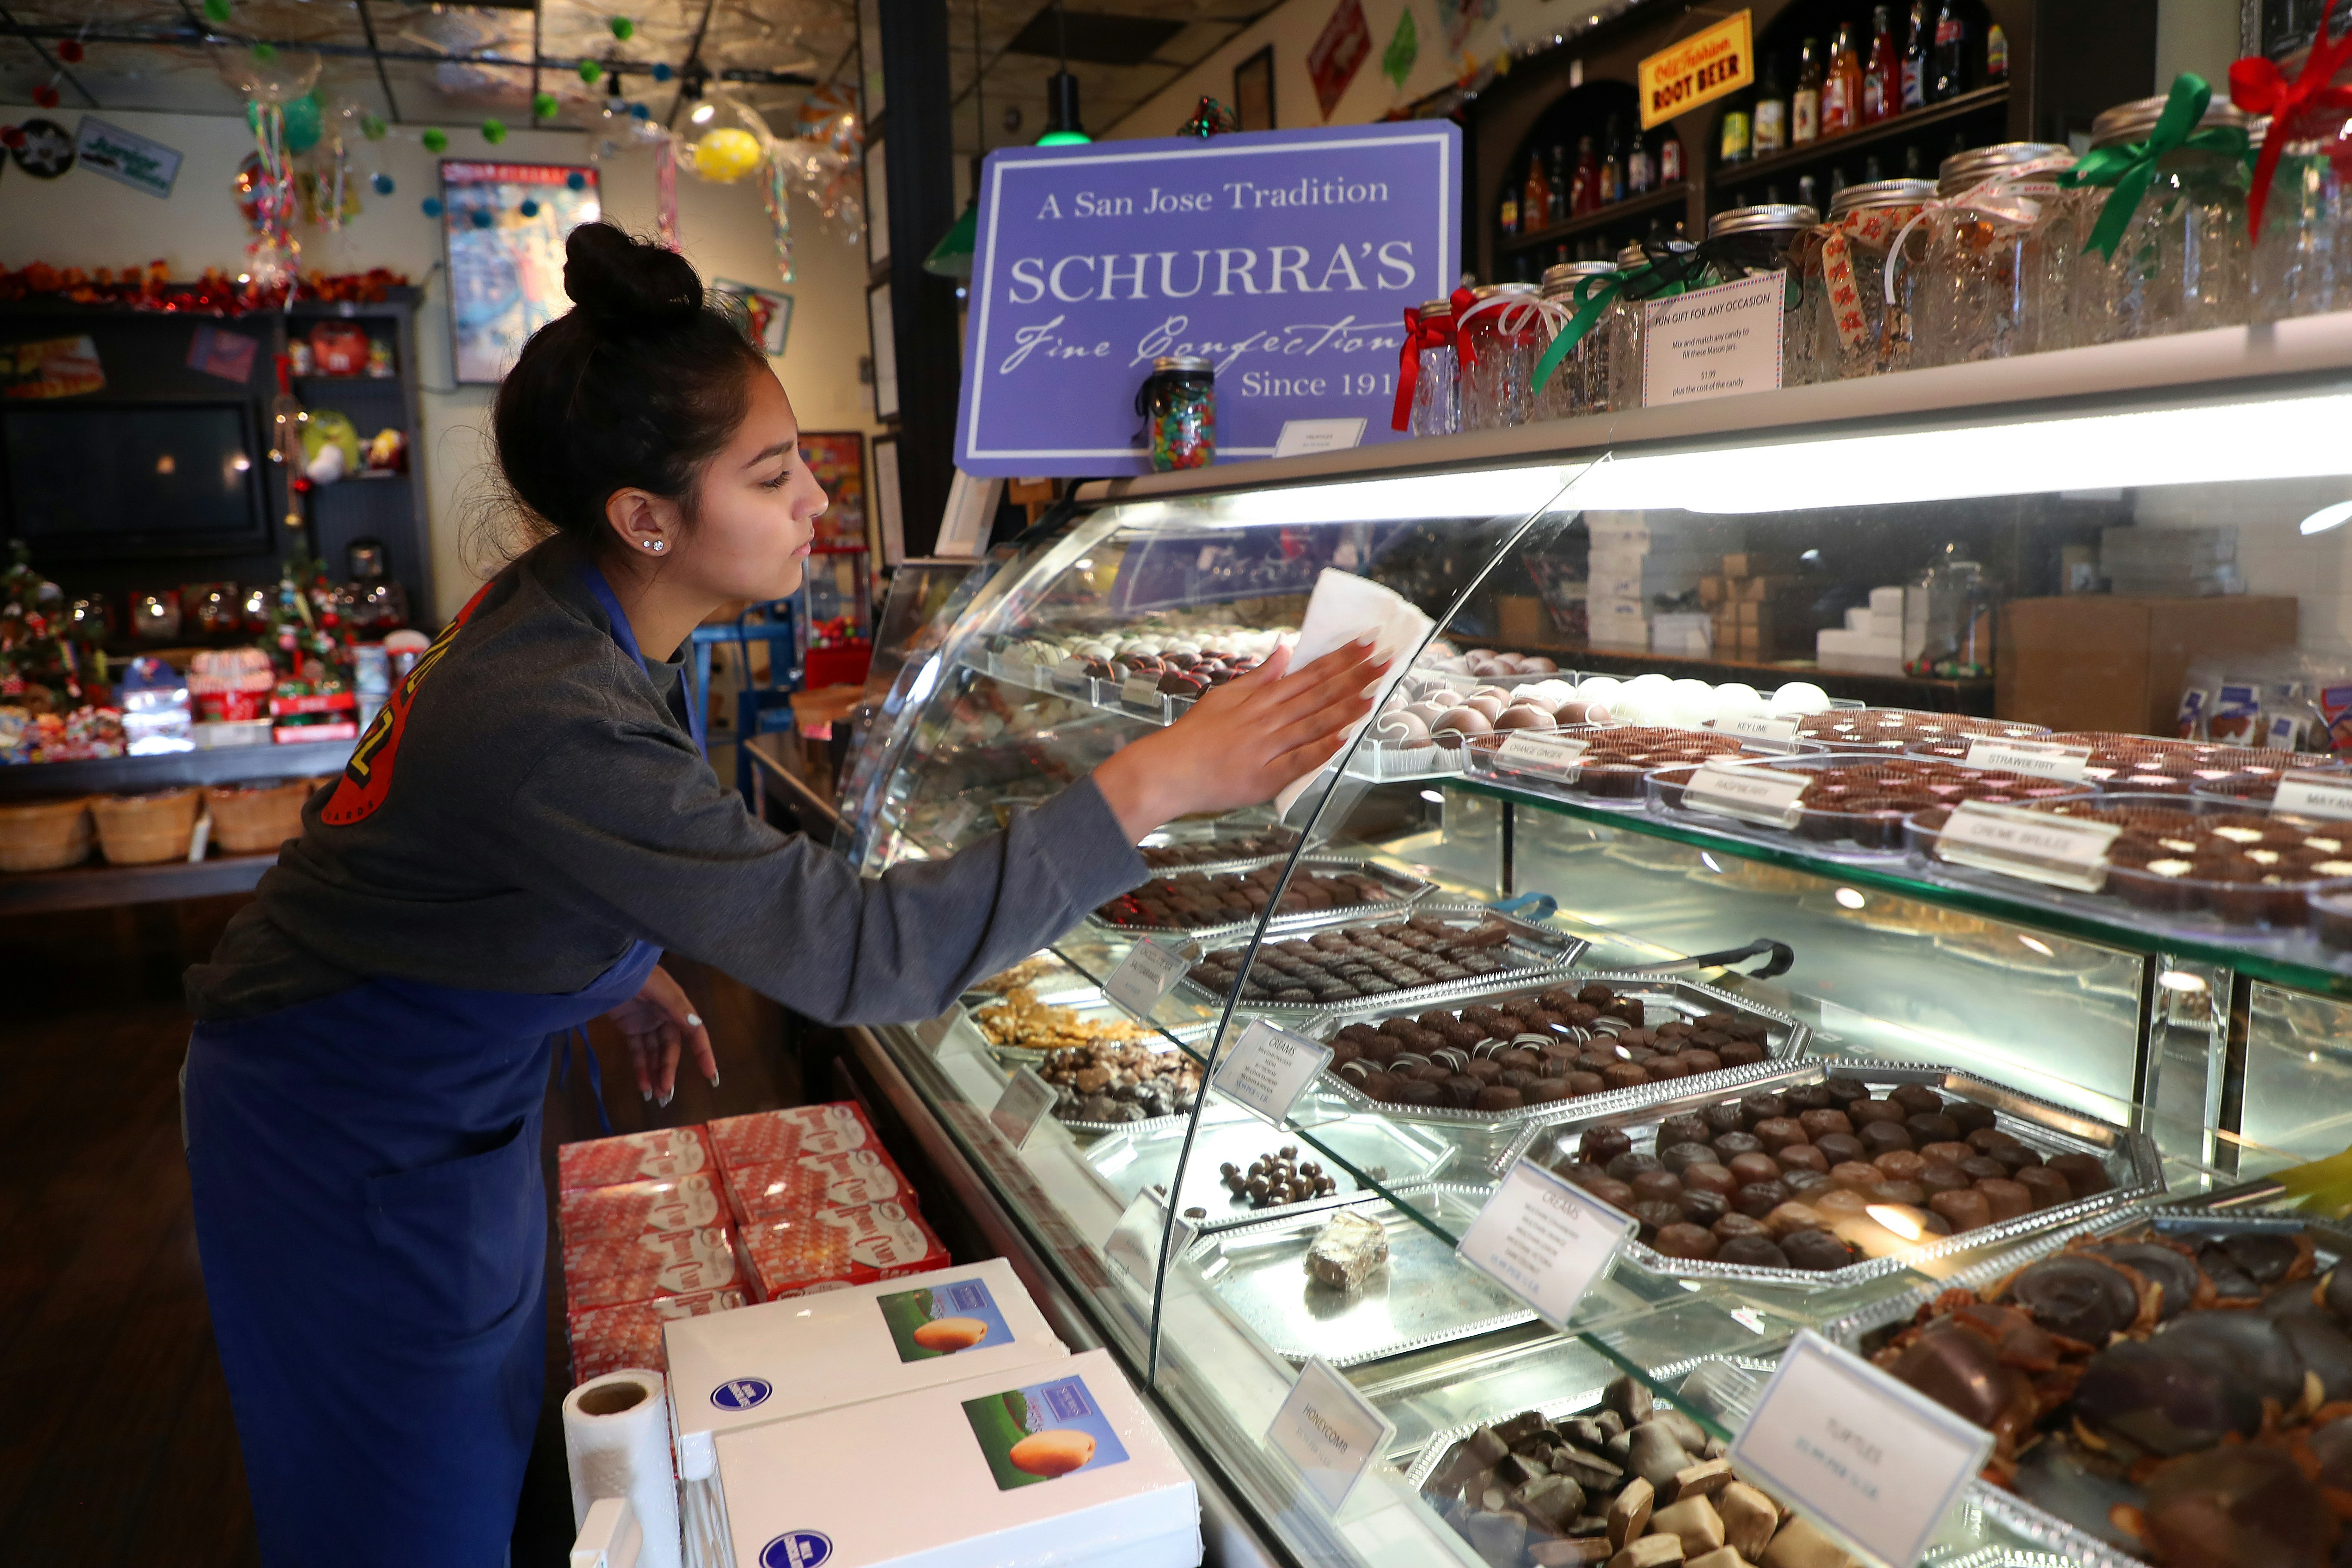 The Willow Glen Sweet Shoppe sells Schurra's Fine Confections